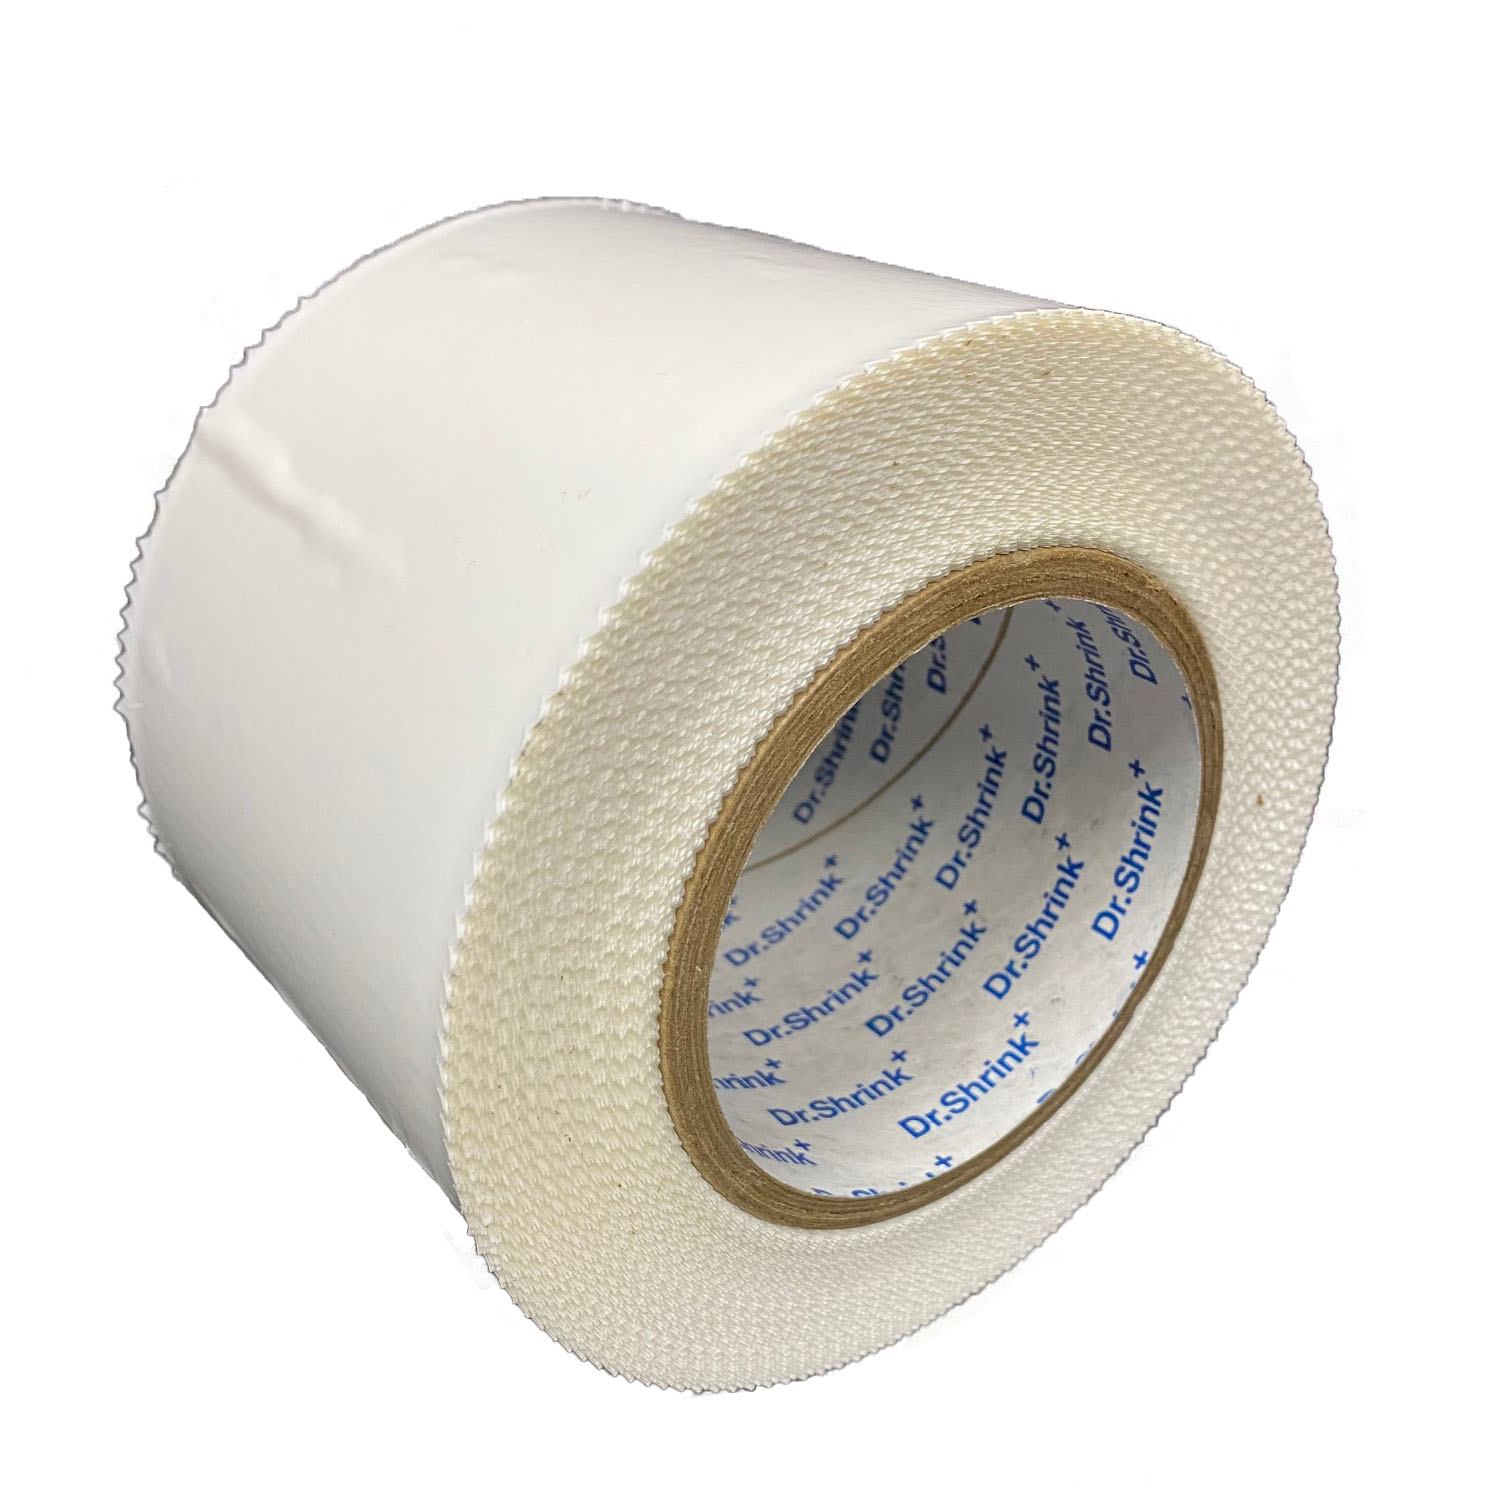 Permanent White Shrink Wrap Tape (DS-724W) 3.75